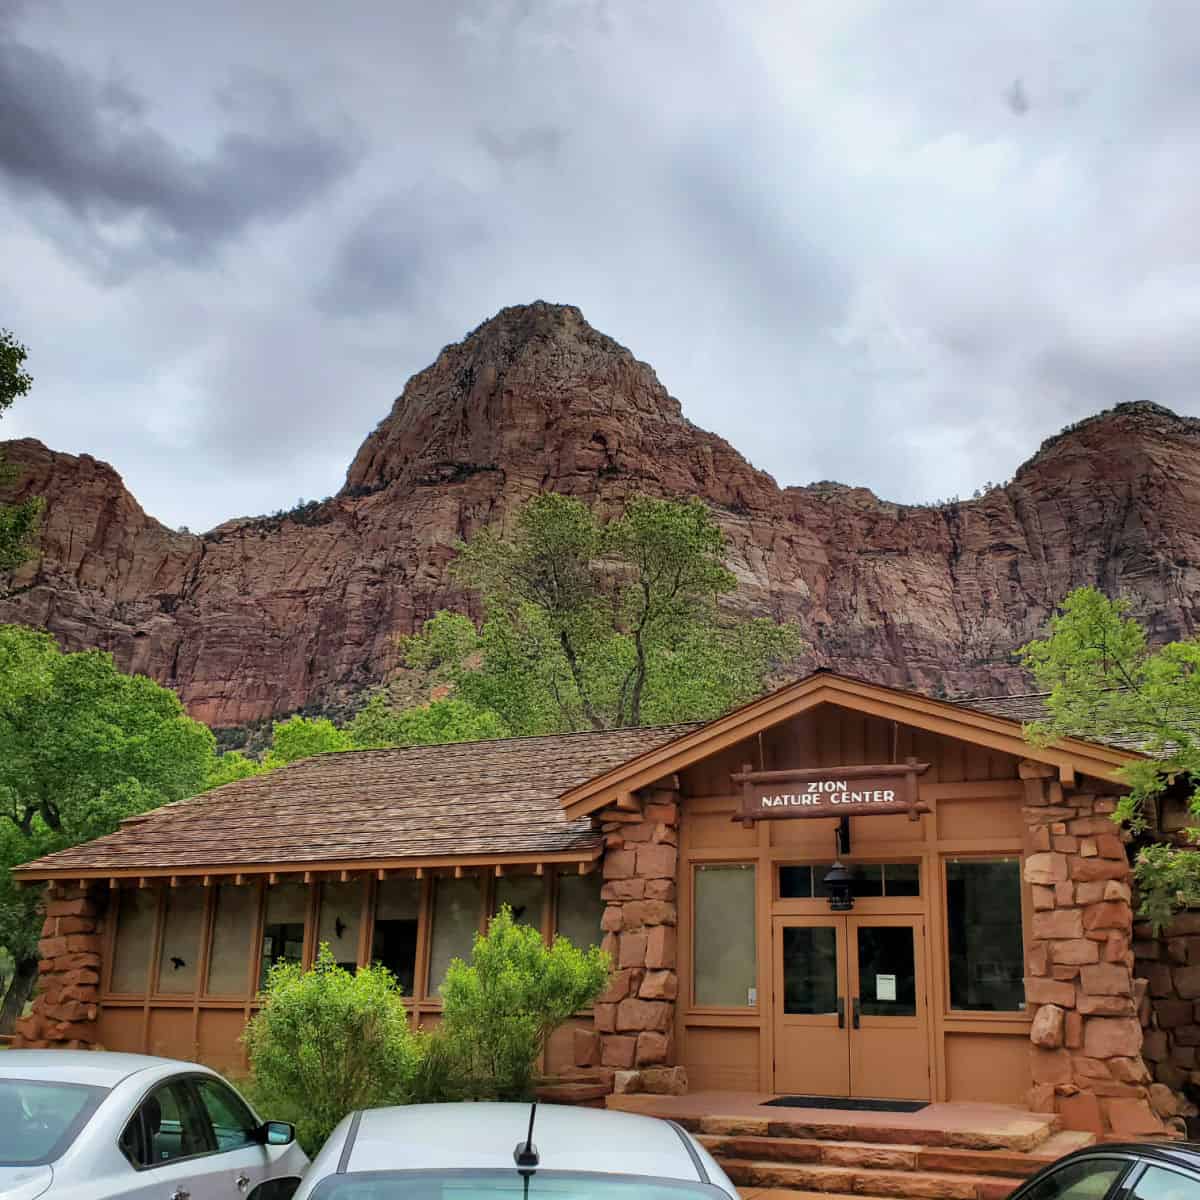 The Zion Nature Center is a great place for kids to learn about Zion National Park and the wildlife and plants that live here